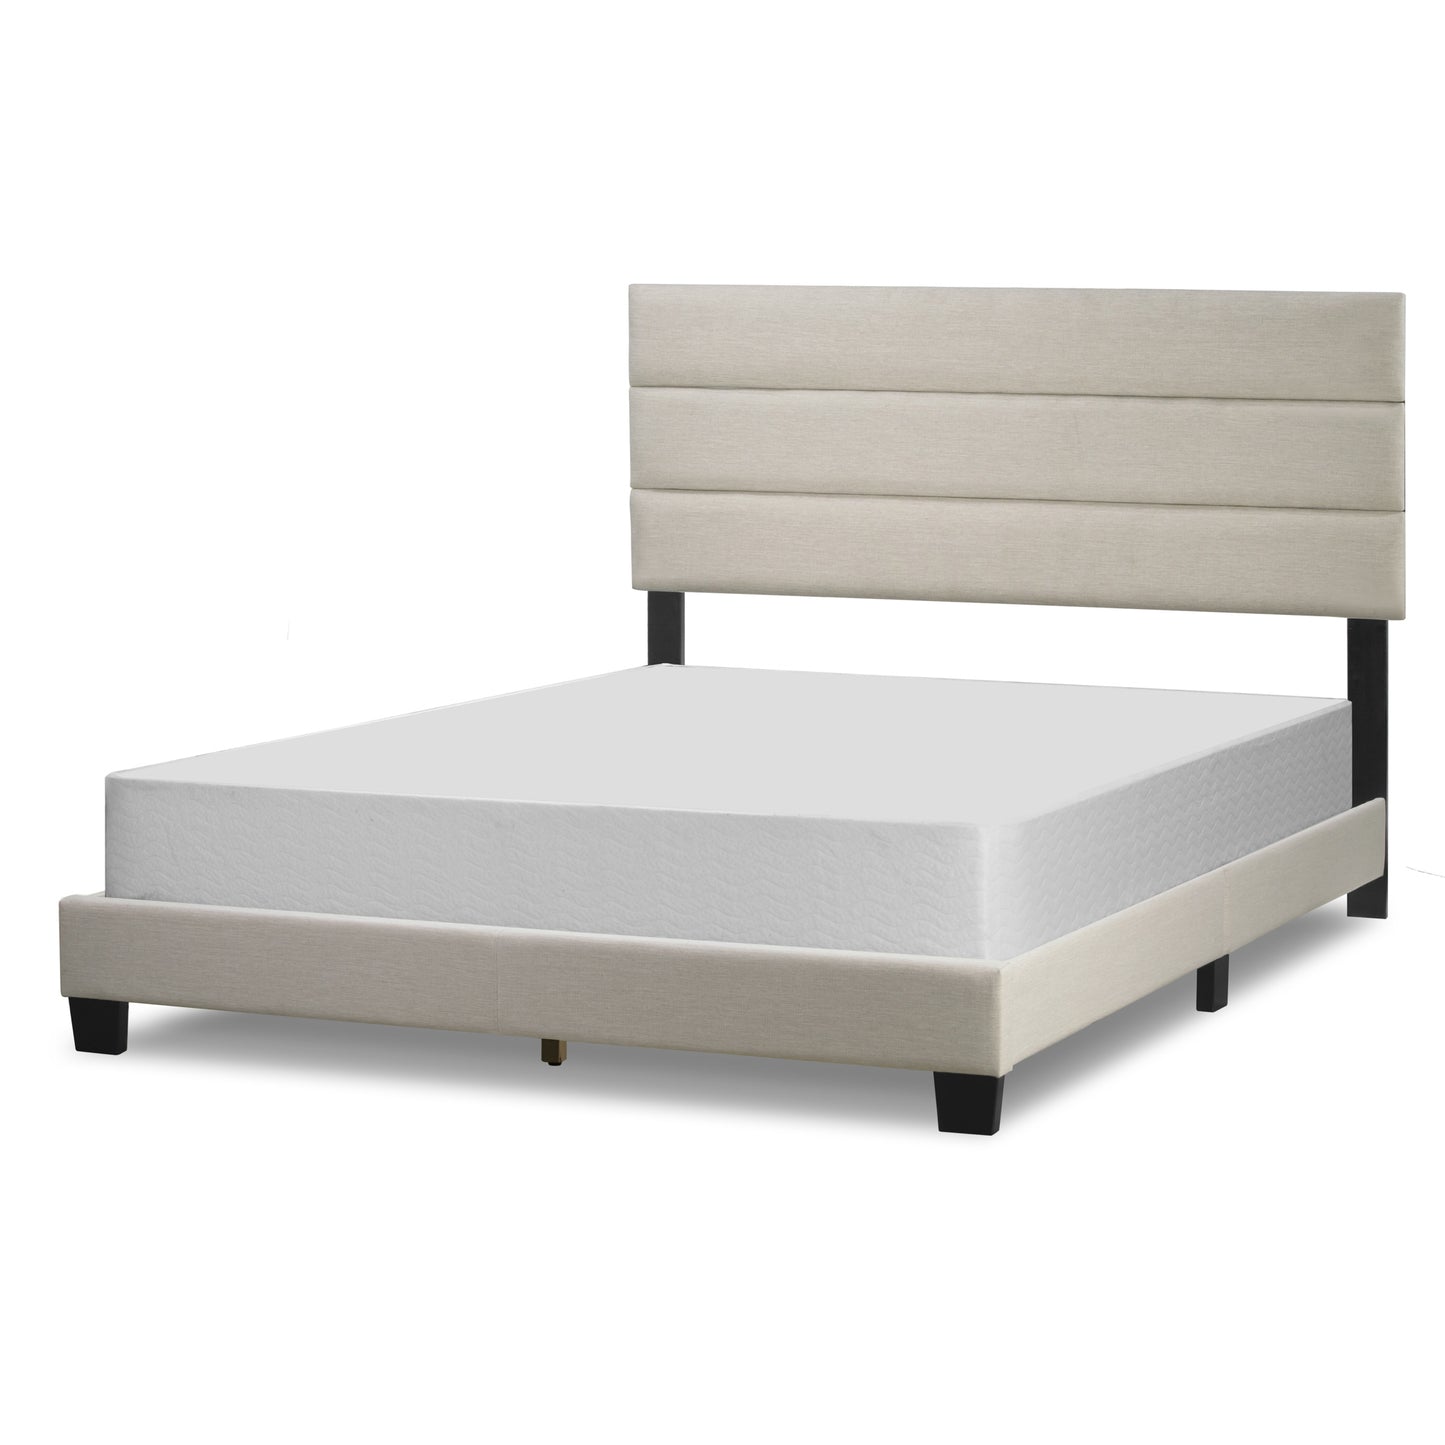 Aris Beige Fabric King Bed with Line Stitching Tufting